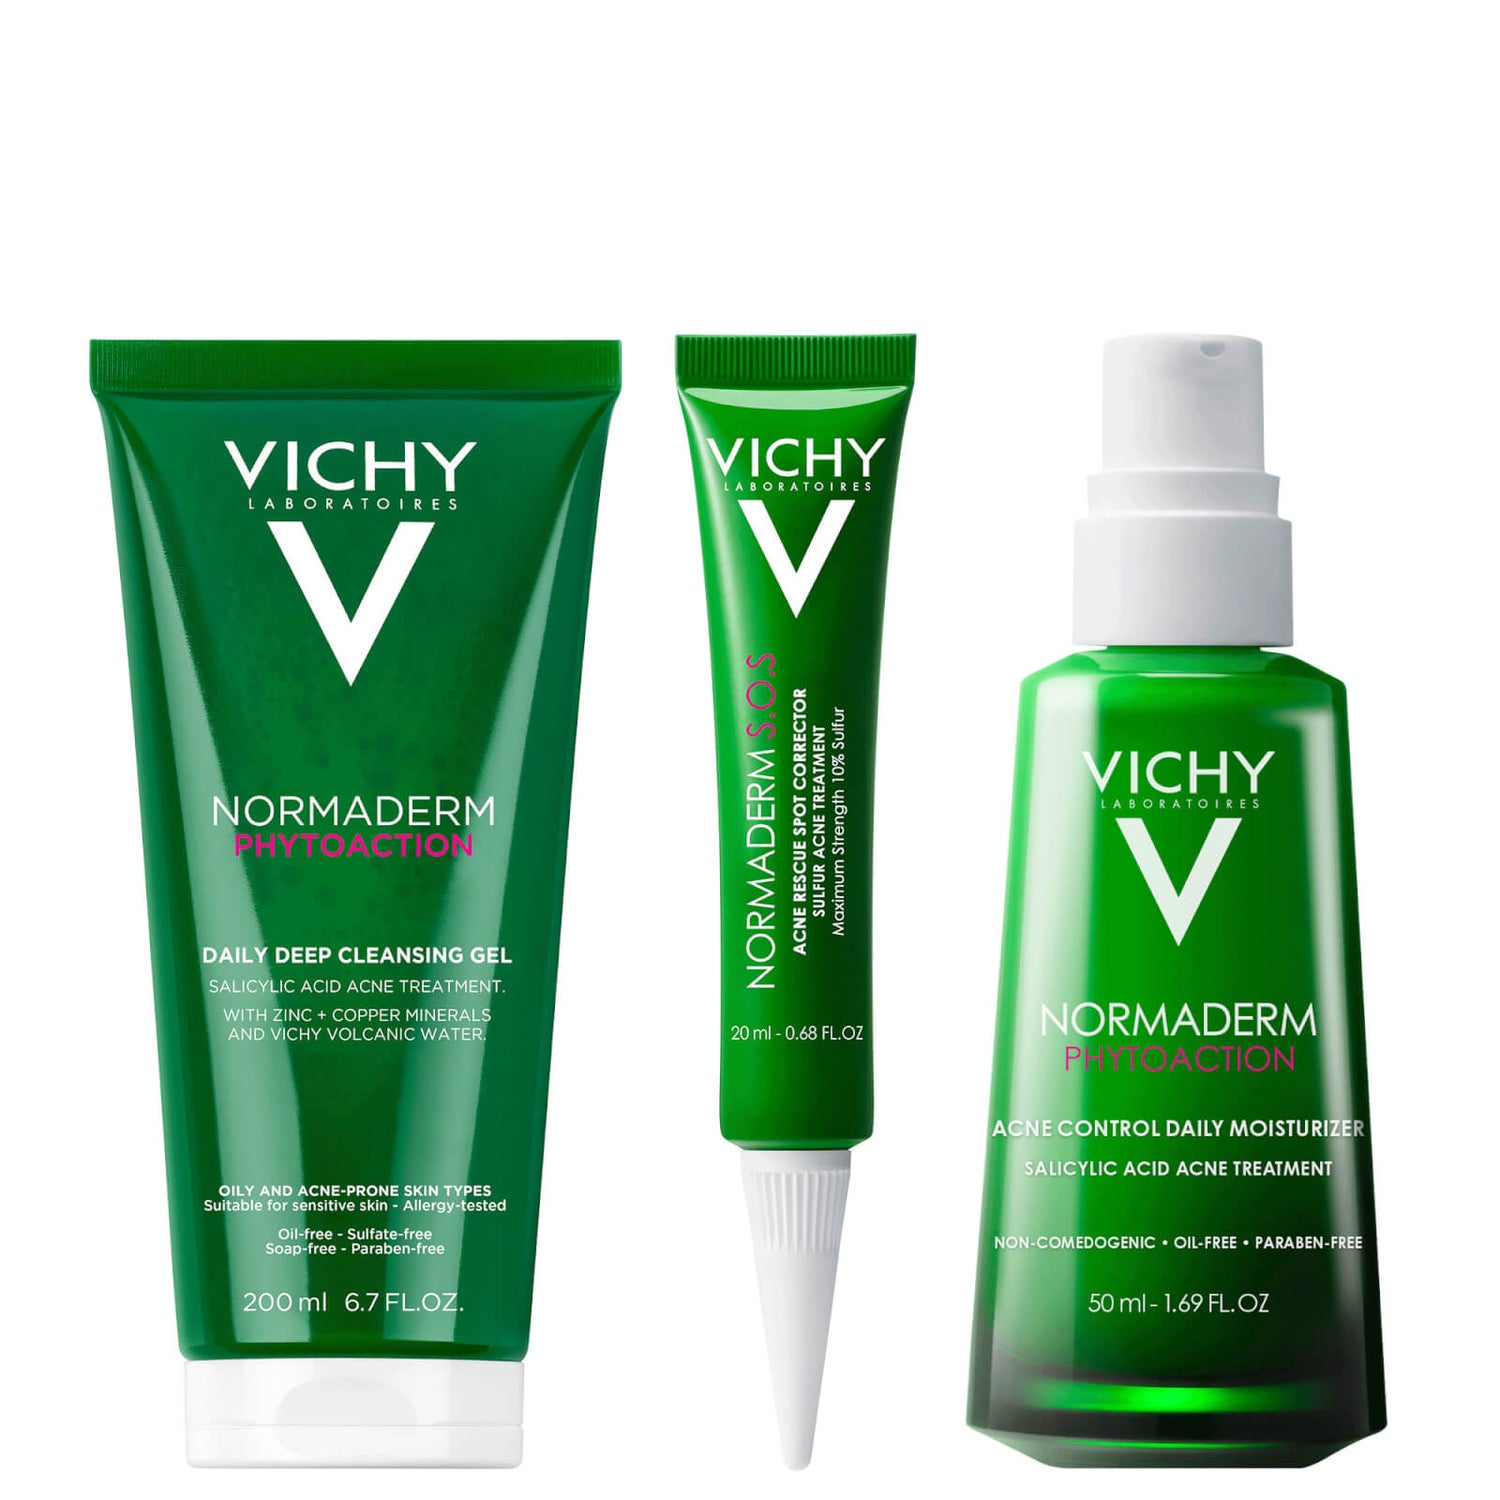 Normaderm gel purifiant intense. Vichy Normaderm. Виши умывалка Normaderm. Vichy Normaderm гель. Vichy Normaderm Serum.